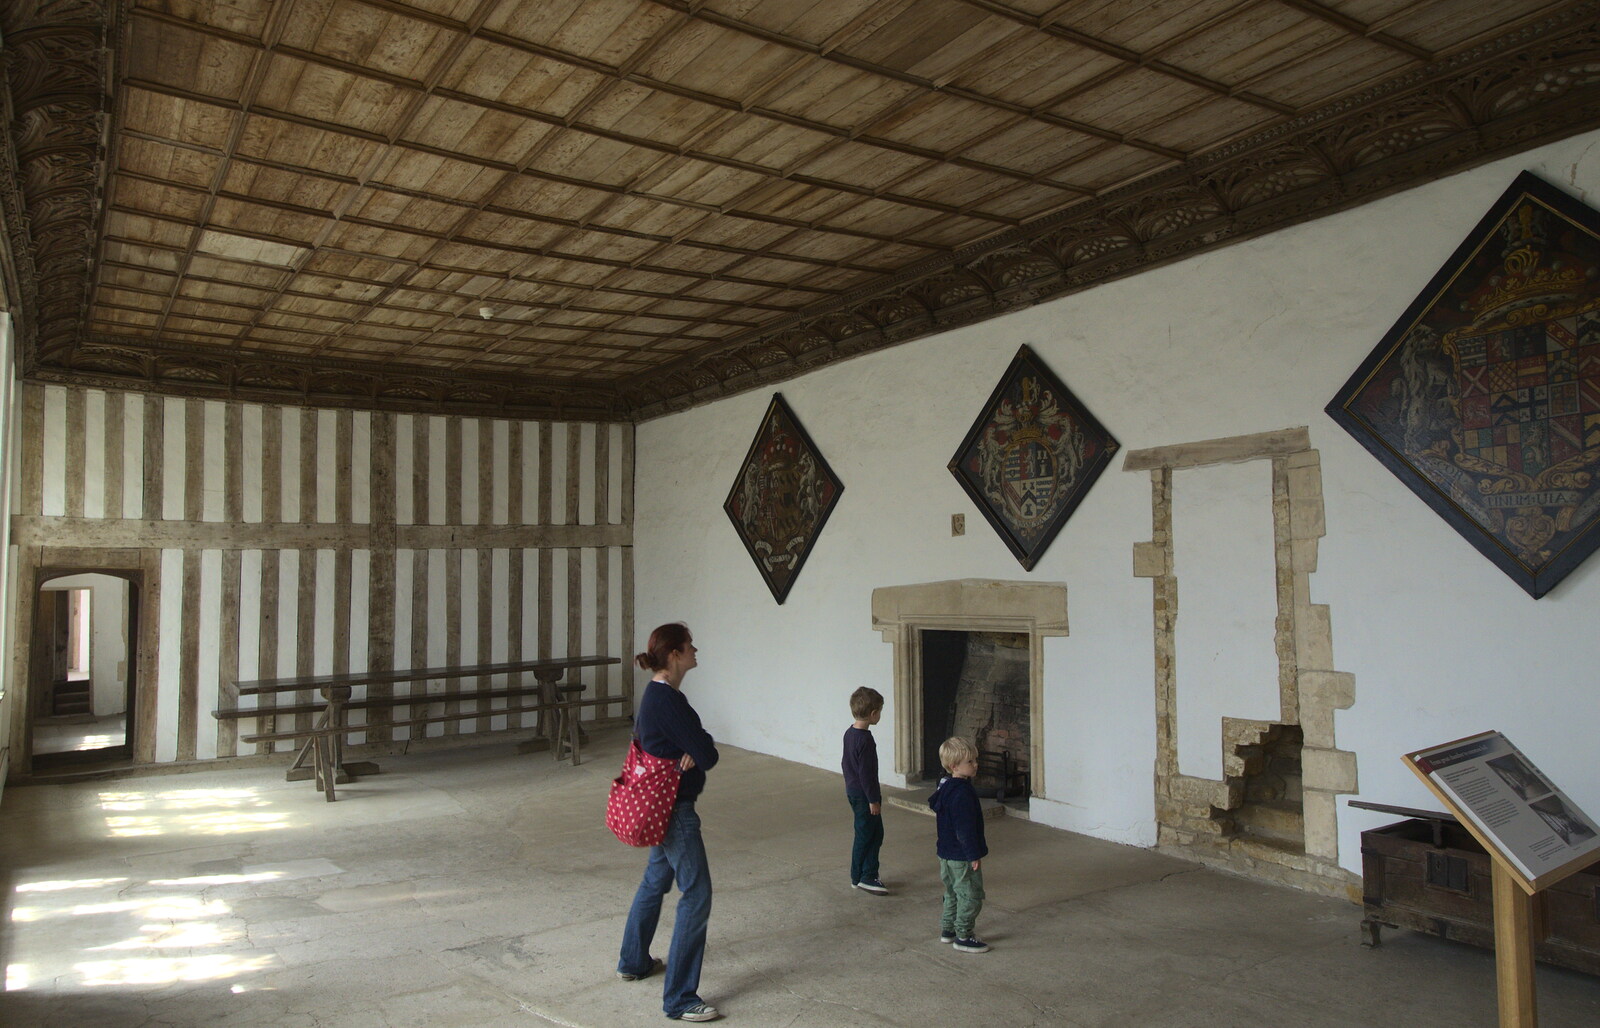 Looking around the Bede House's great hall from The BSCC Weekend Away, Lyddington, Rutland - 9th May 2015